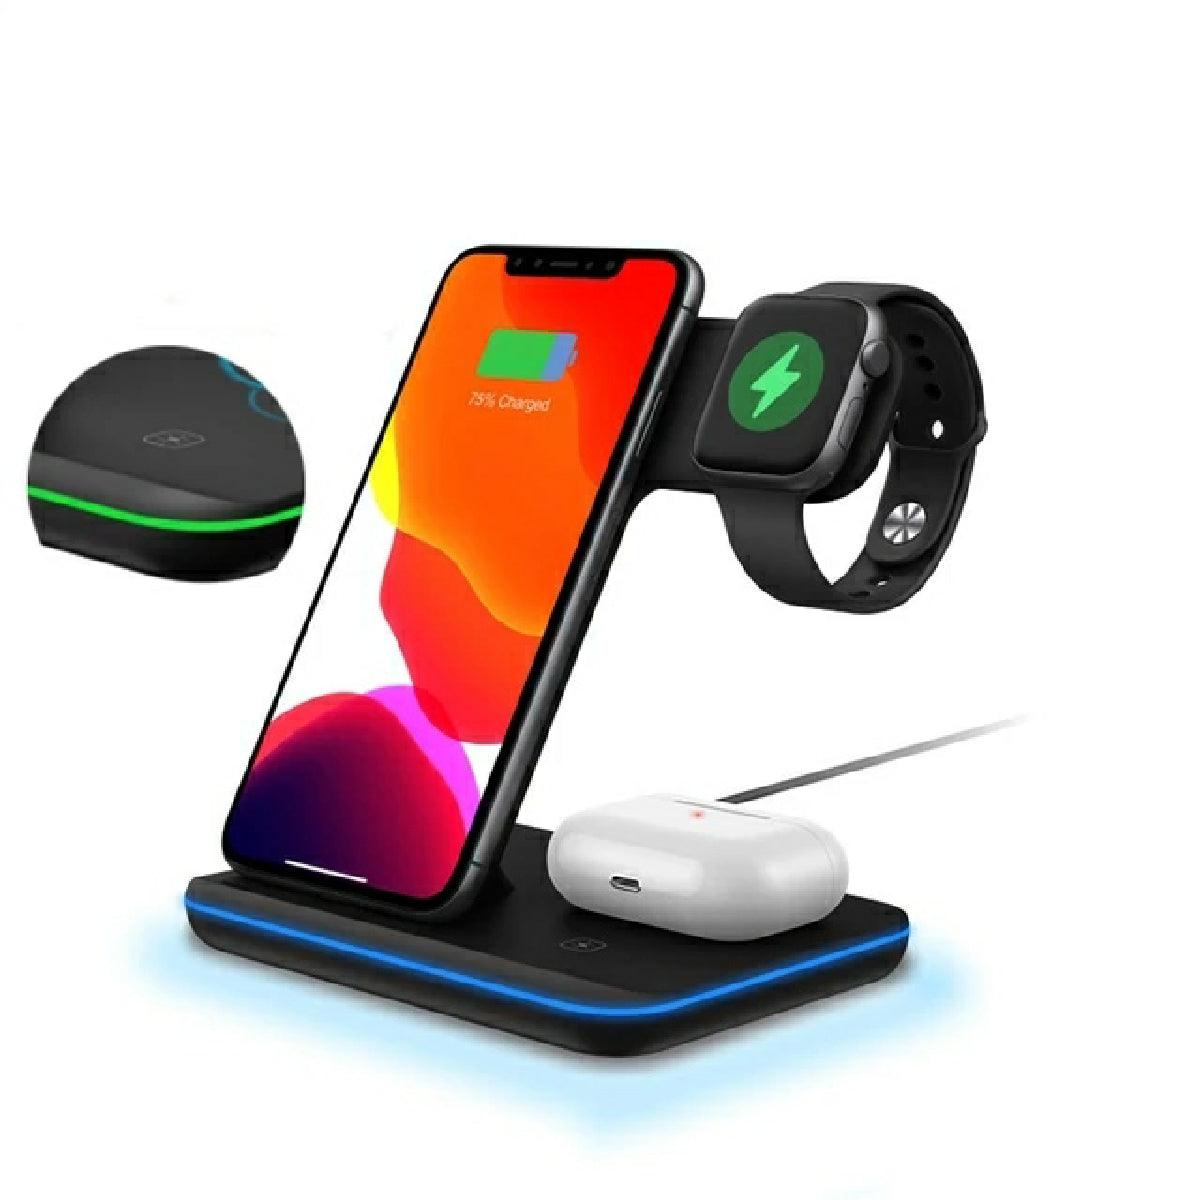 Elegant and Concise Wireless Charging Module - For Apple Devices - dealskart.com.au